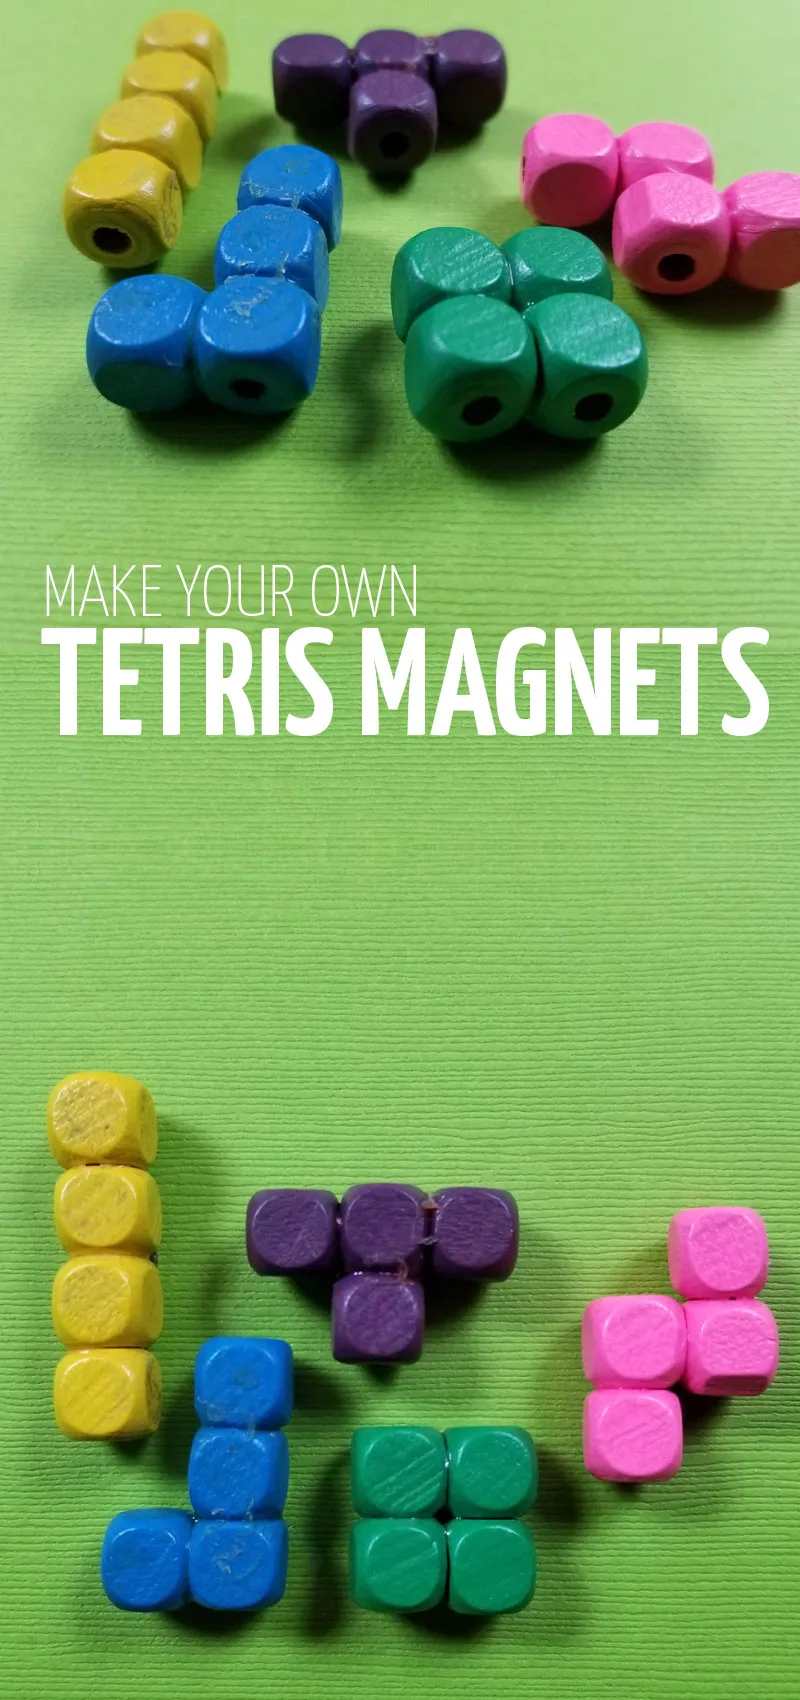 Click if you're a TETRIS fan and would love to learn how to make your own DIY Tetris-inspired magnets! This super cool Tetris craft is one of my favorite crafts for teens - including teenage boys and girls! #teencrafts #tetris #magnets